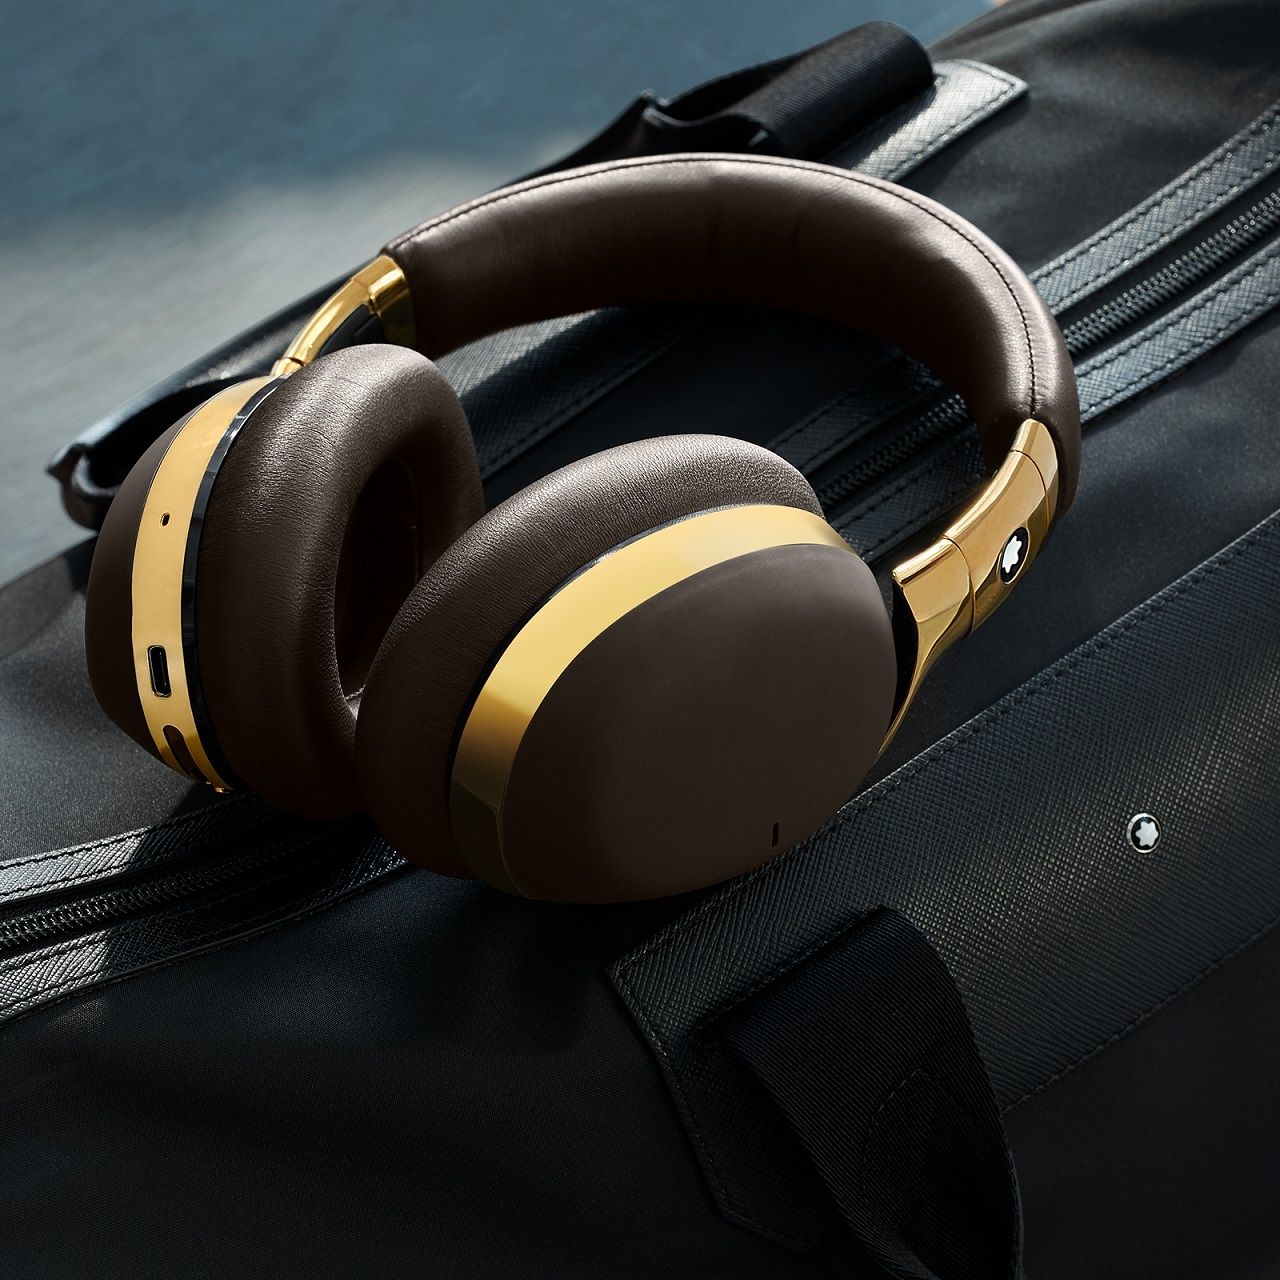 the brand's first active noise canceling headphones